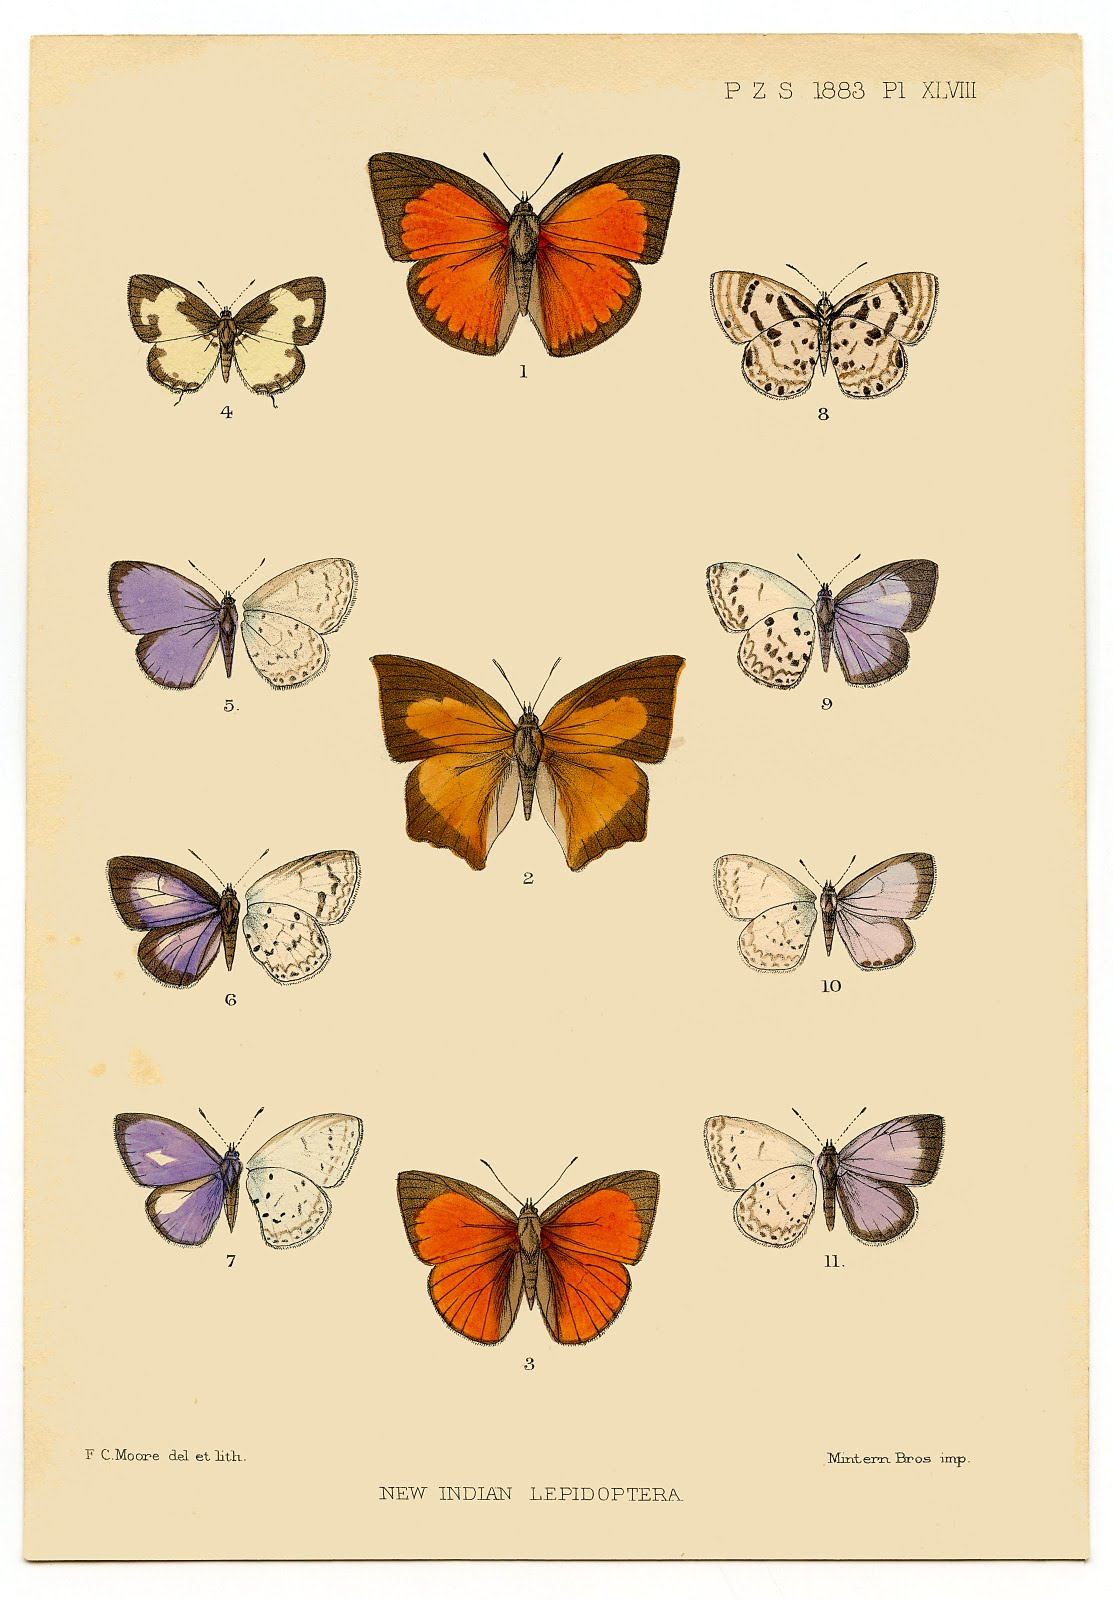 Picture Of Butterfly To Print